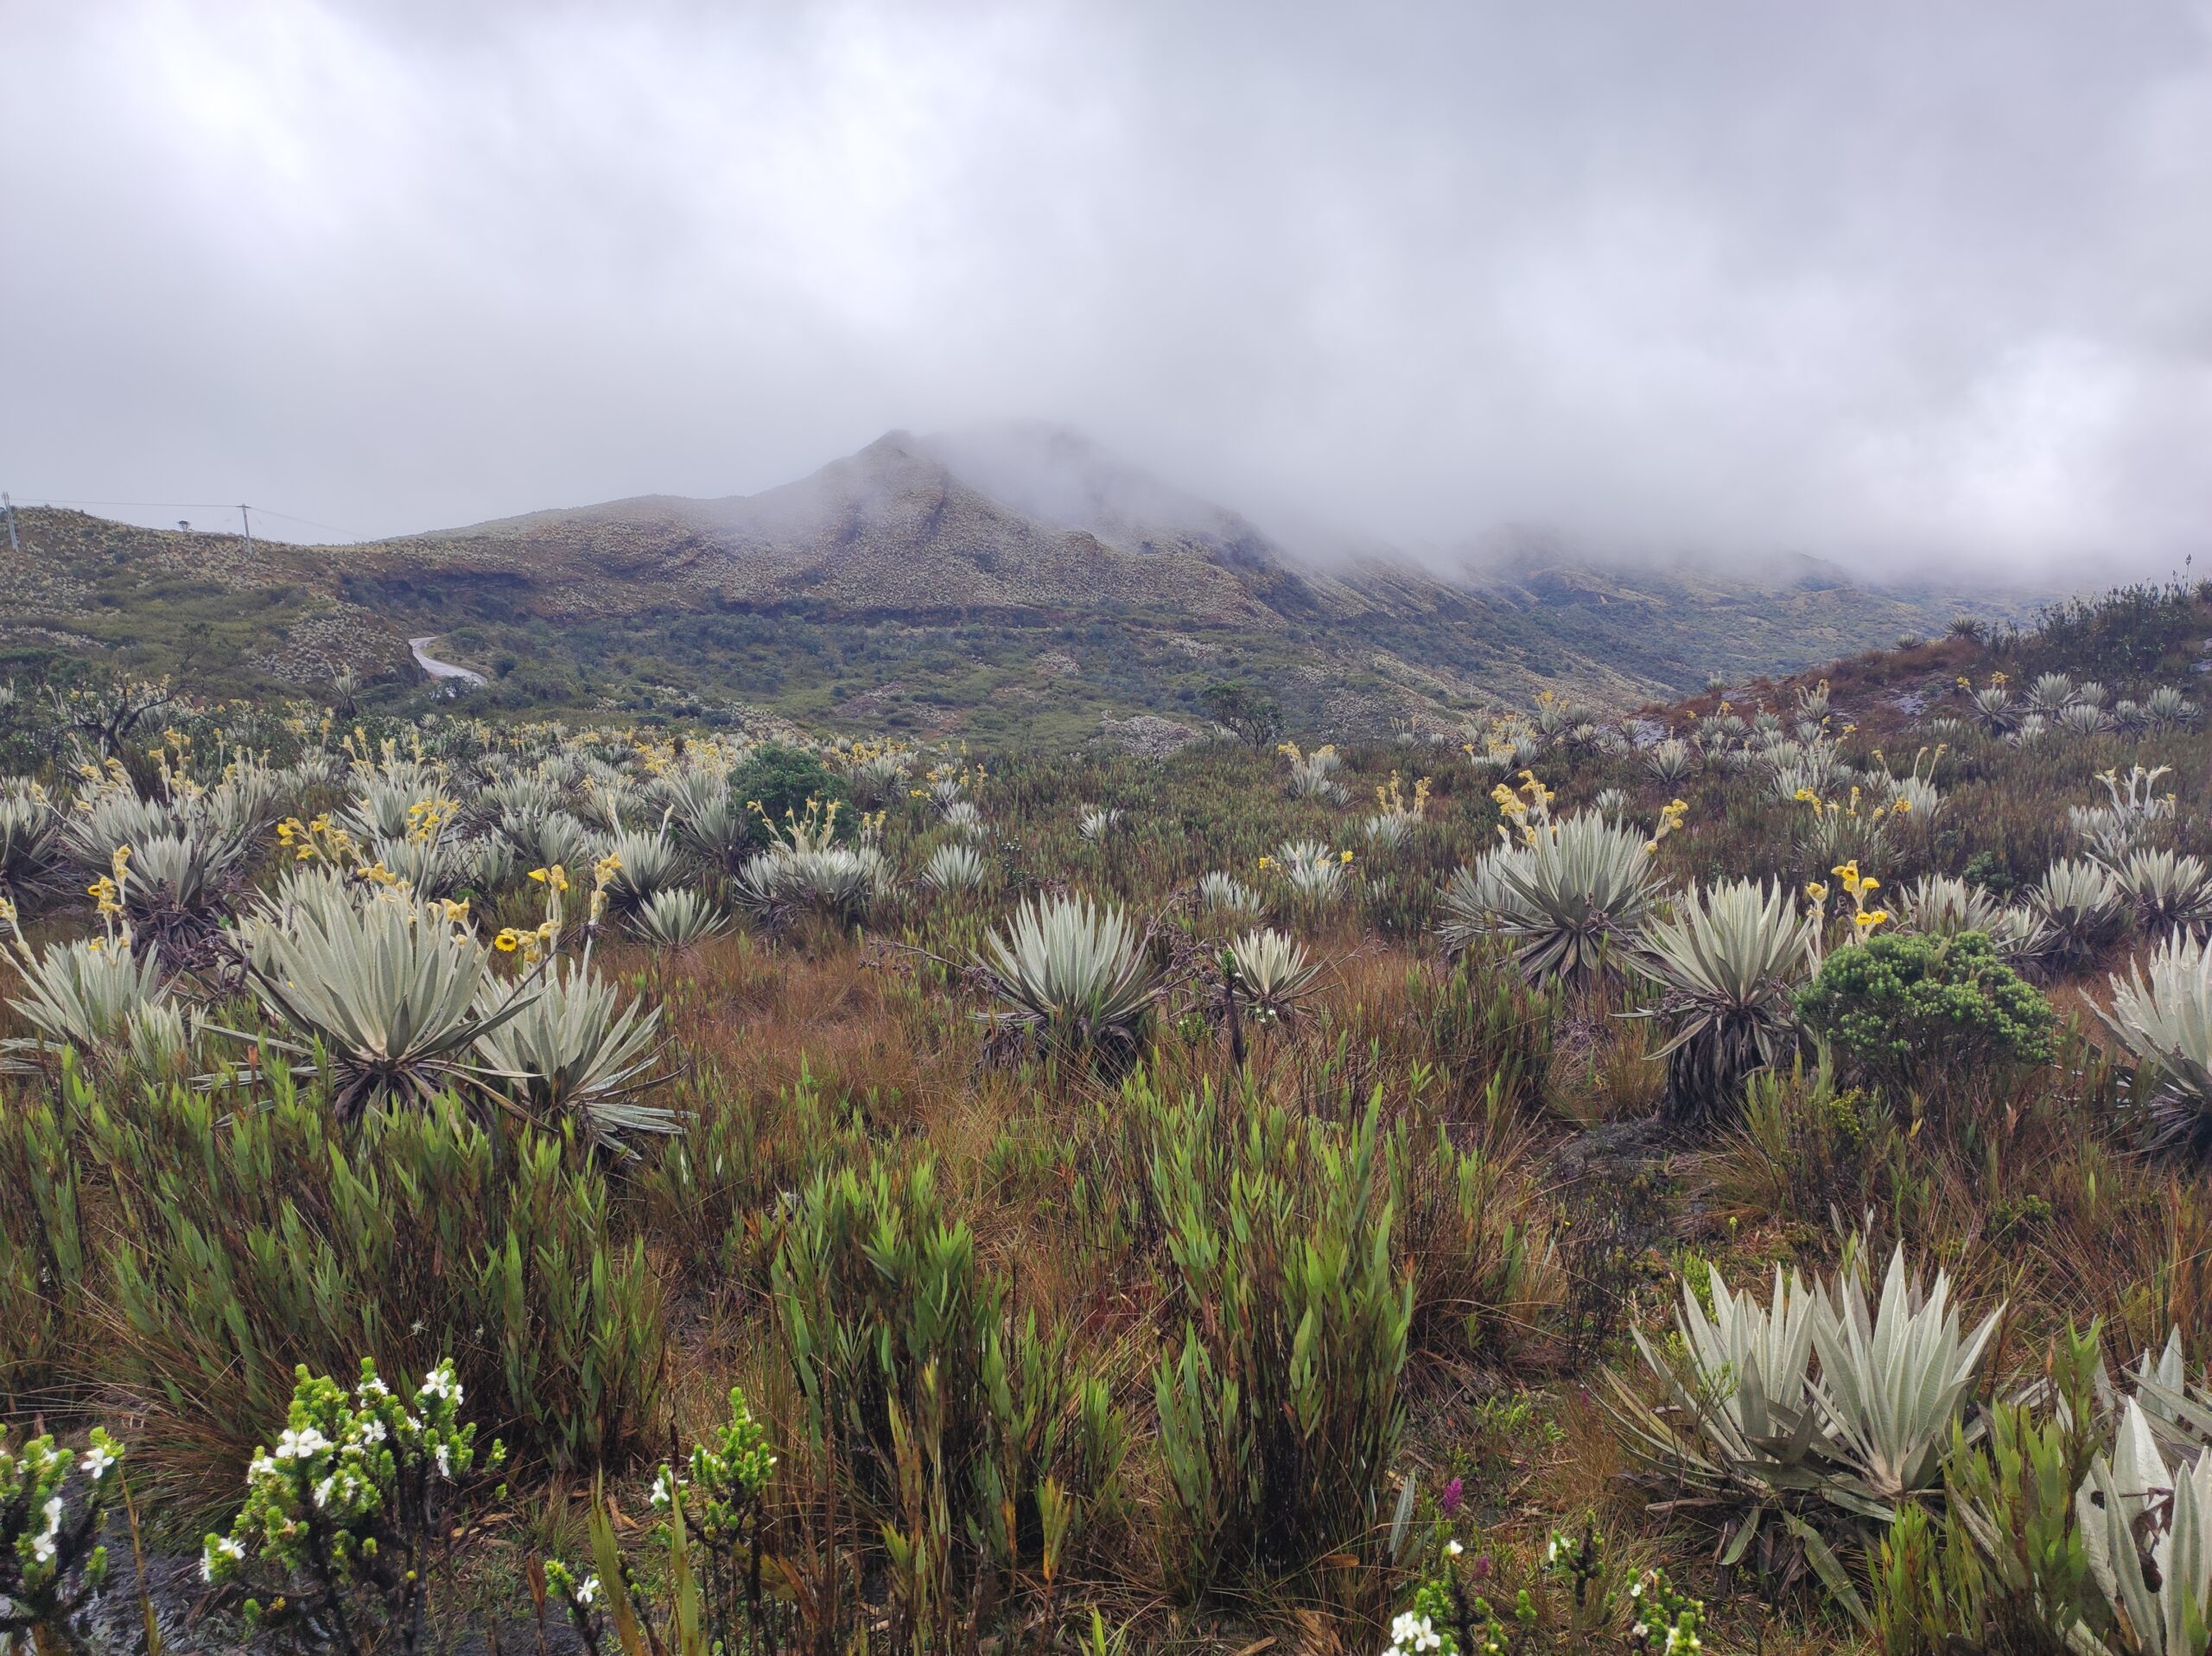 A mountainous landscape with cloudy skies features dense vegetation and various plants and shrubs in the foreground, while rising hills partially obscured by mist loom in the background. It's reminiscent of vistas often seen on Bogotá city tours.